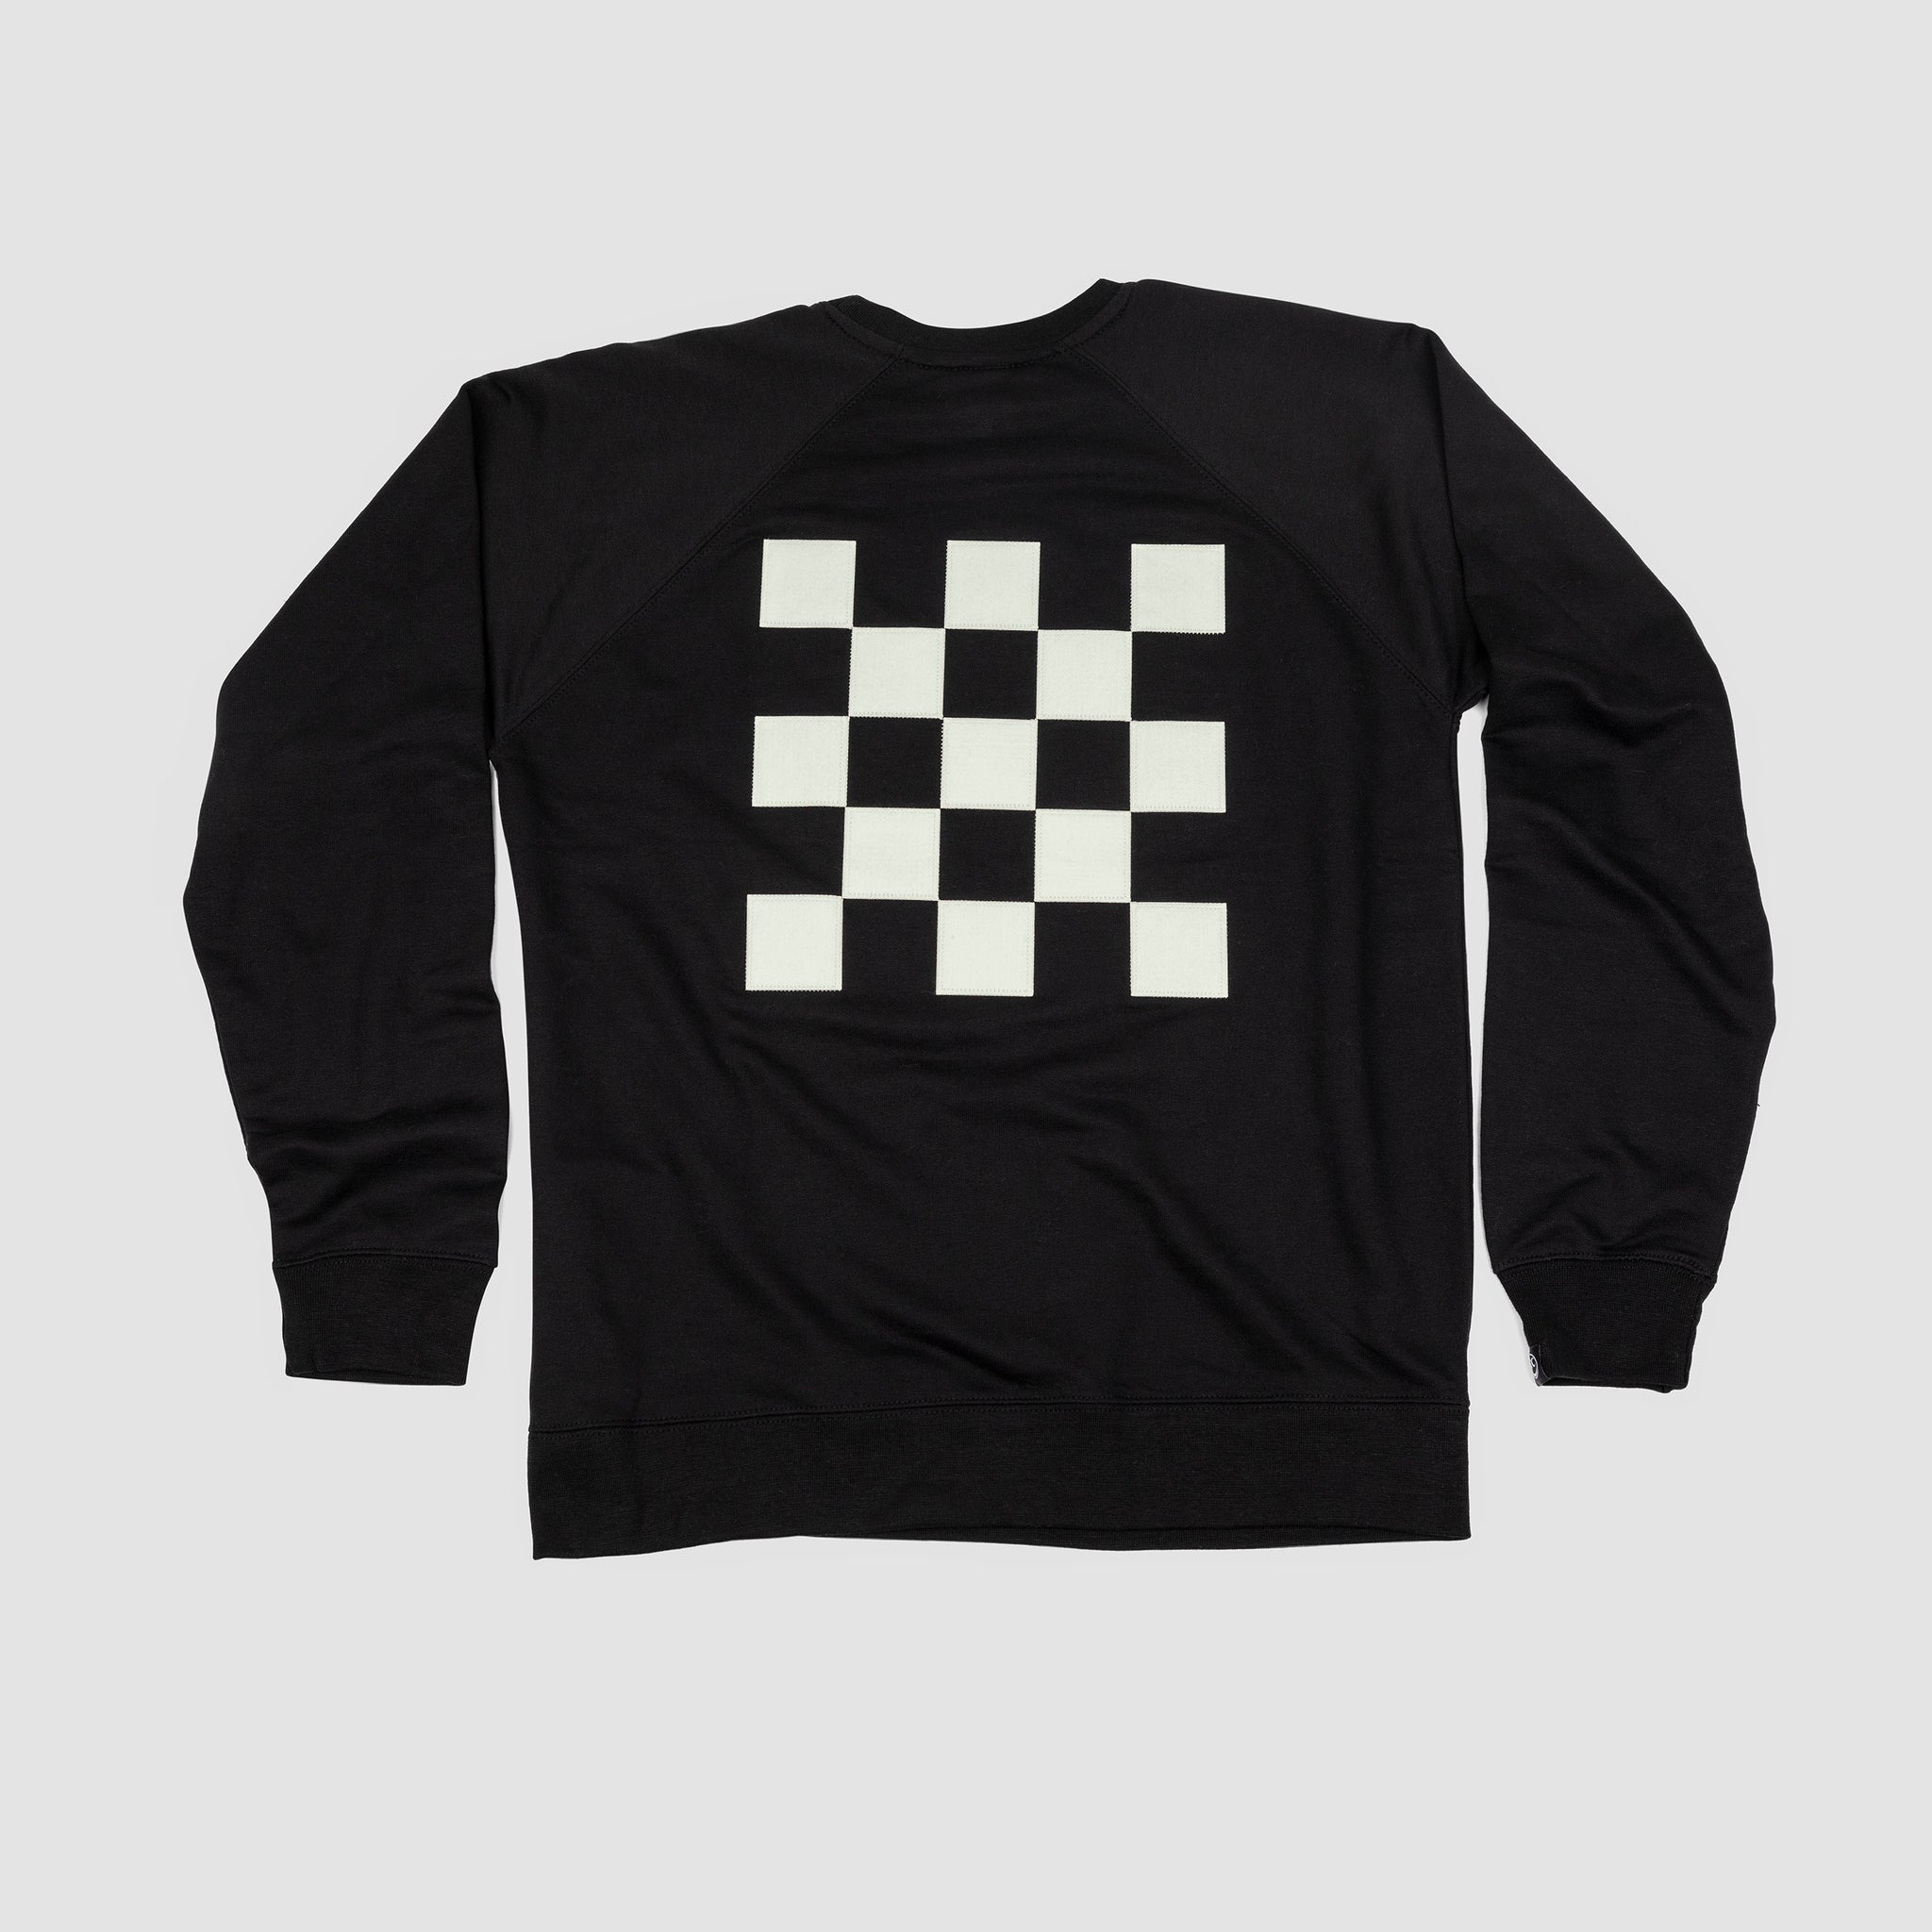 Back shot of black adult unisex premium crew sweatshirt with large centered black and white checkered patch.